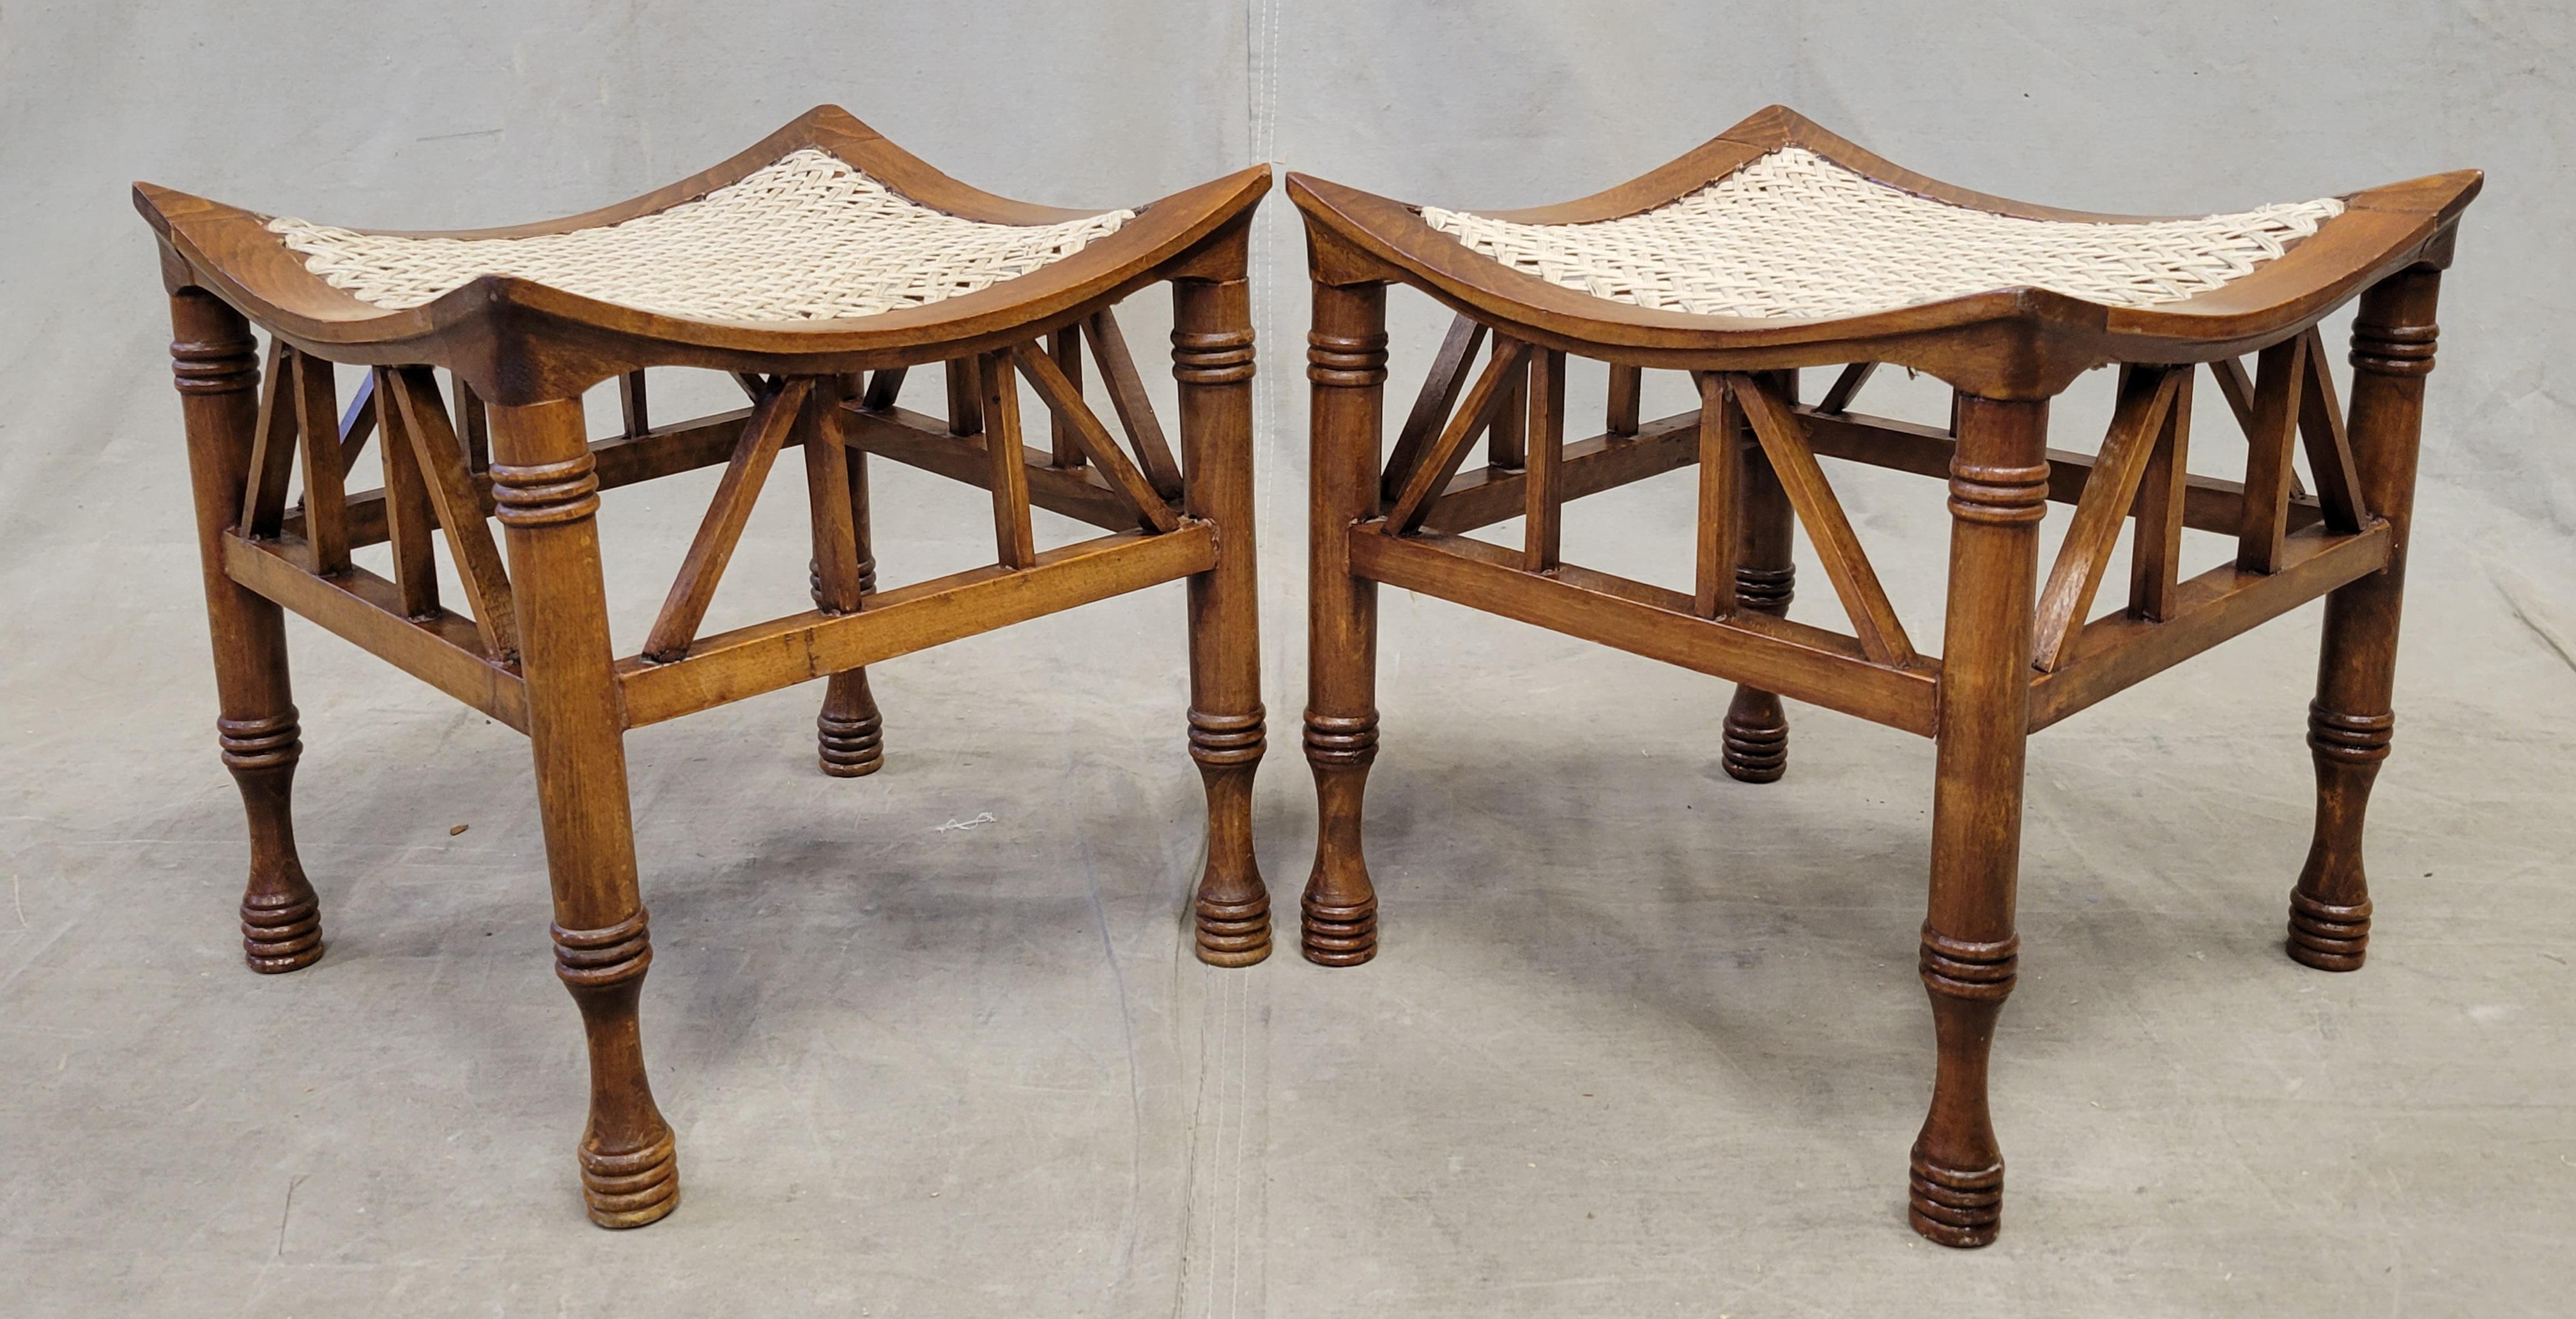 This charming pair of Egyptian Revival Thebes stools are attributed to Liberty & Co. of London. This style of stool was manufactured in England from 1884-1919 as part of the popular Egyptian revival design style. Made of stained pine or beech wood